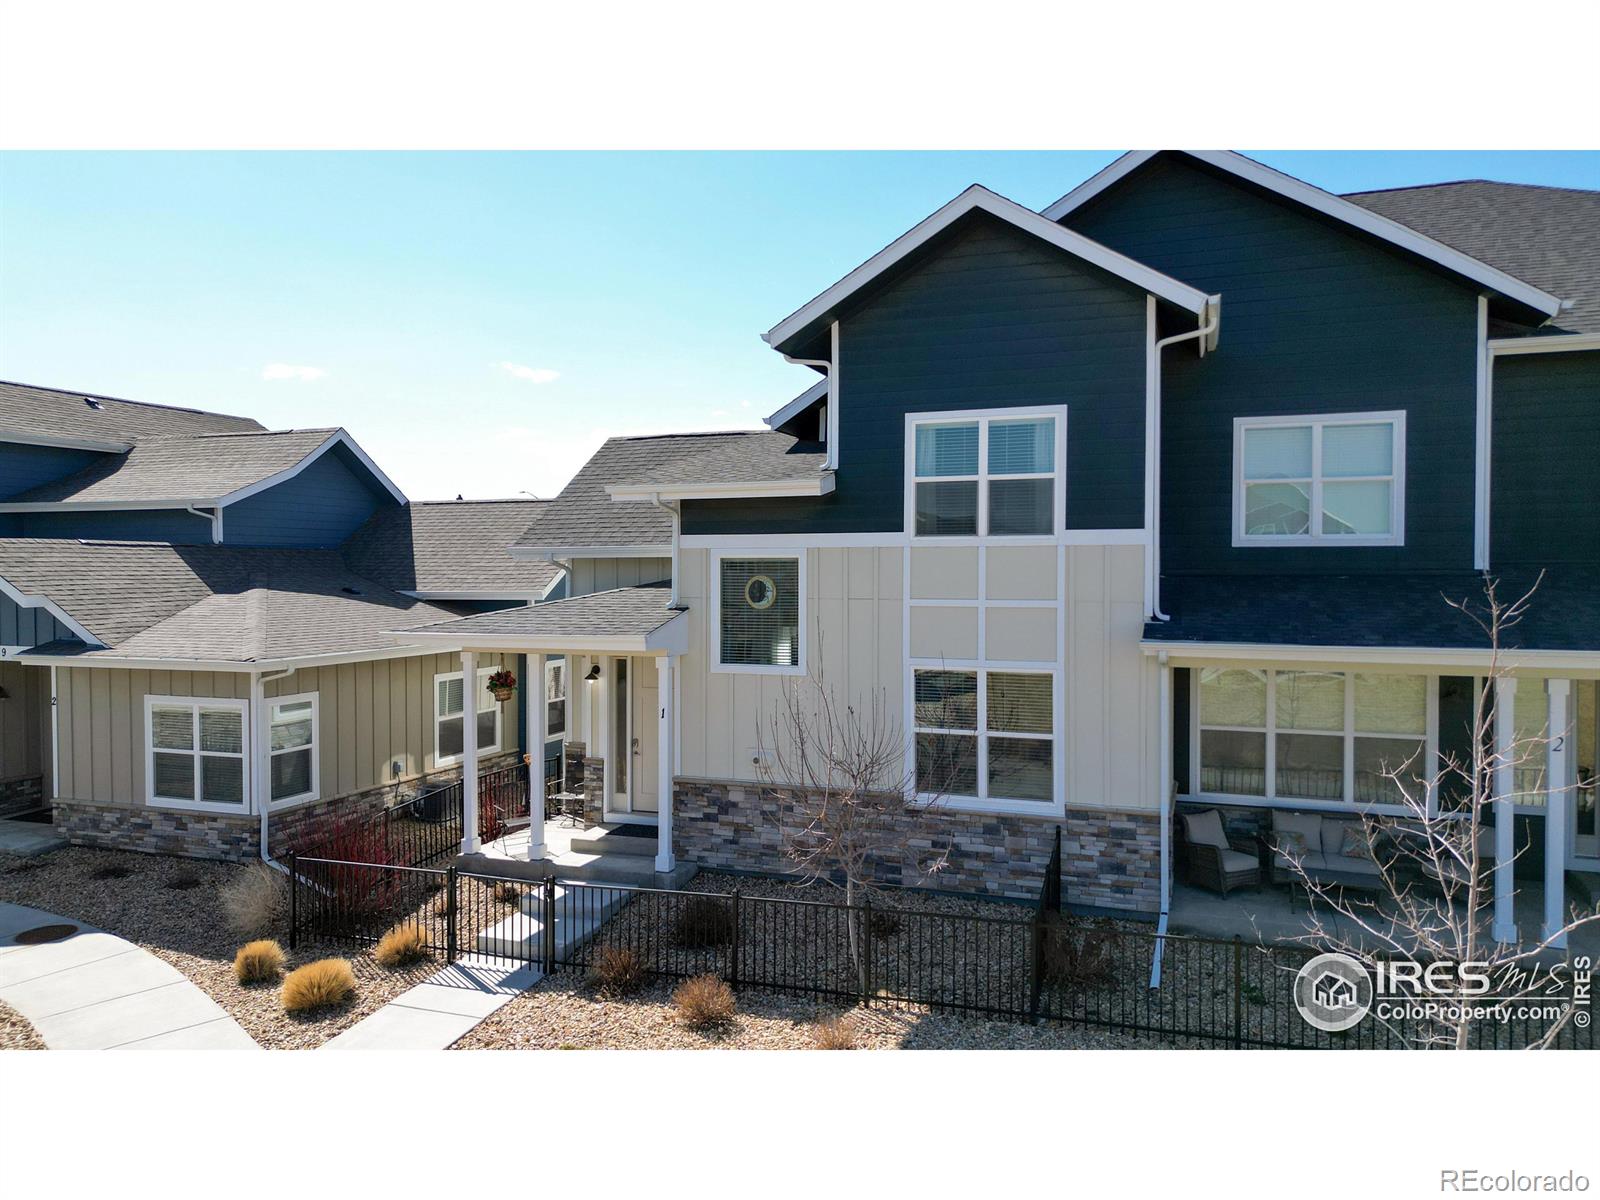 3313  Green Lake Drive, fort collins MLS: 4567891005500 Beds: 3 Baths: 3 Price: $440,000